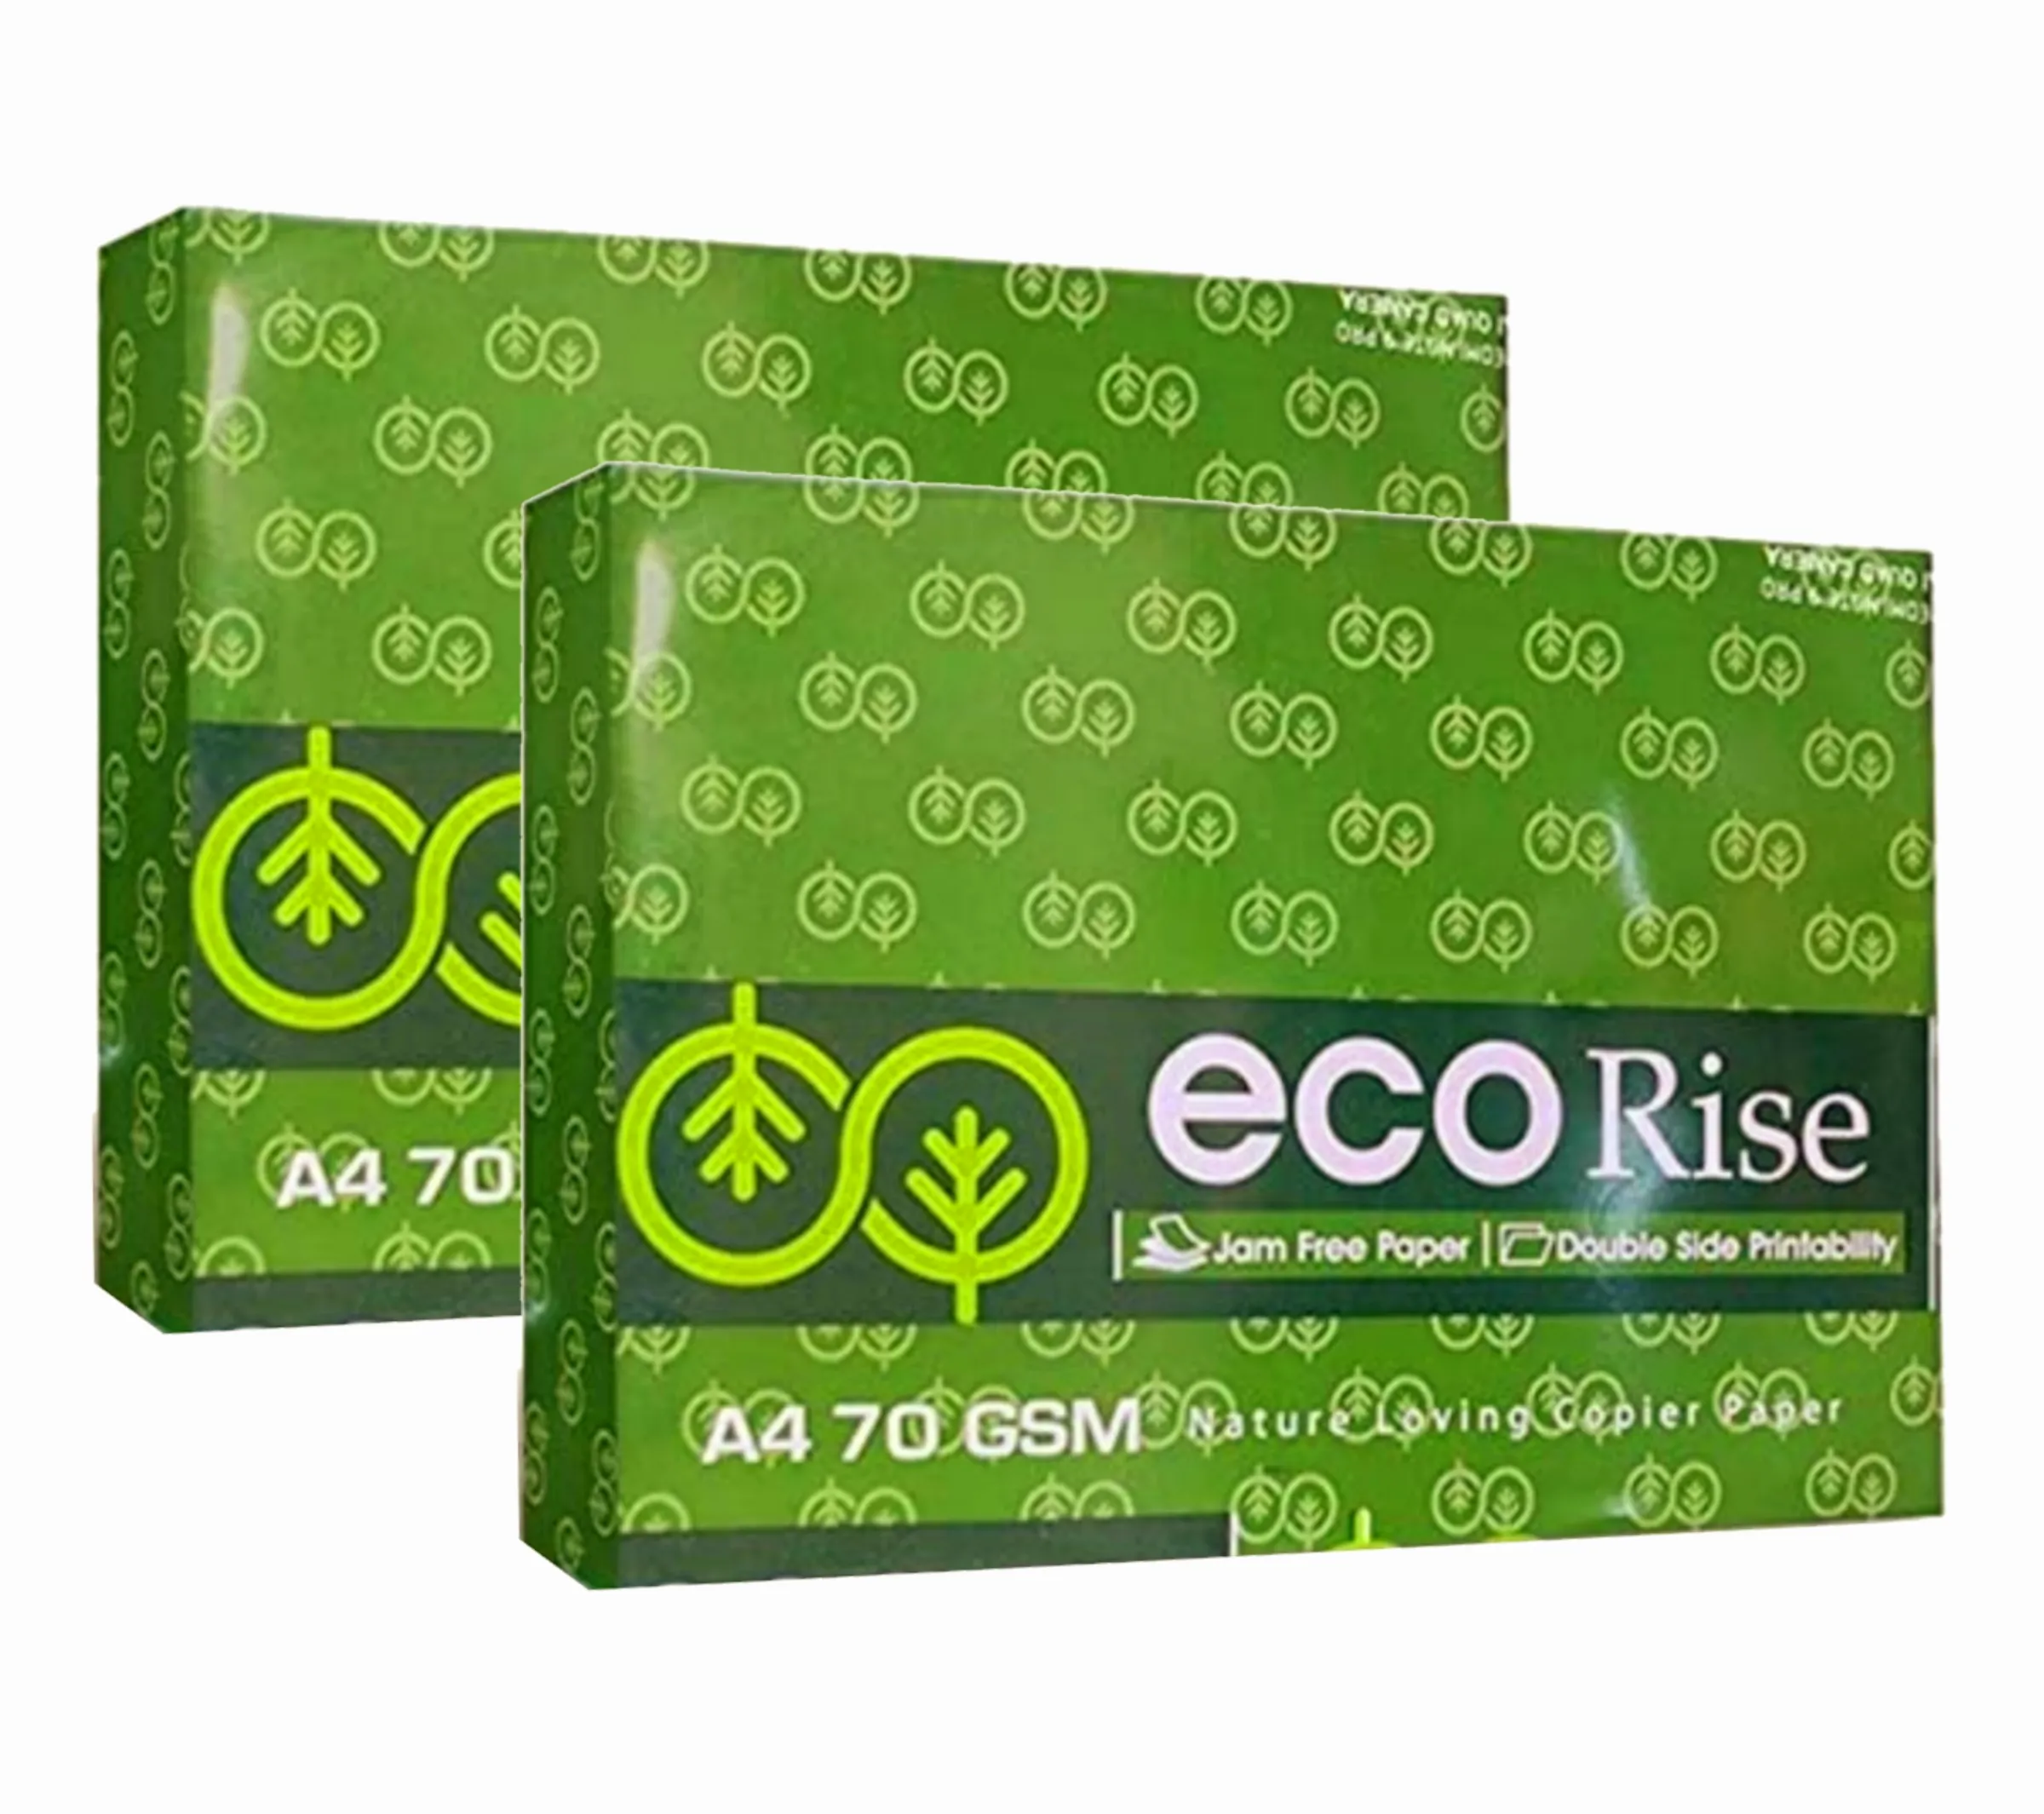 Eco Rise Printing Copy A4 Size JK Paper Eco Tree Friendly 70 GSM 500 Sheet Pack of 2